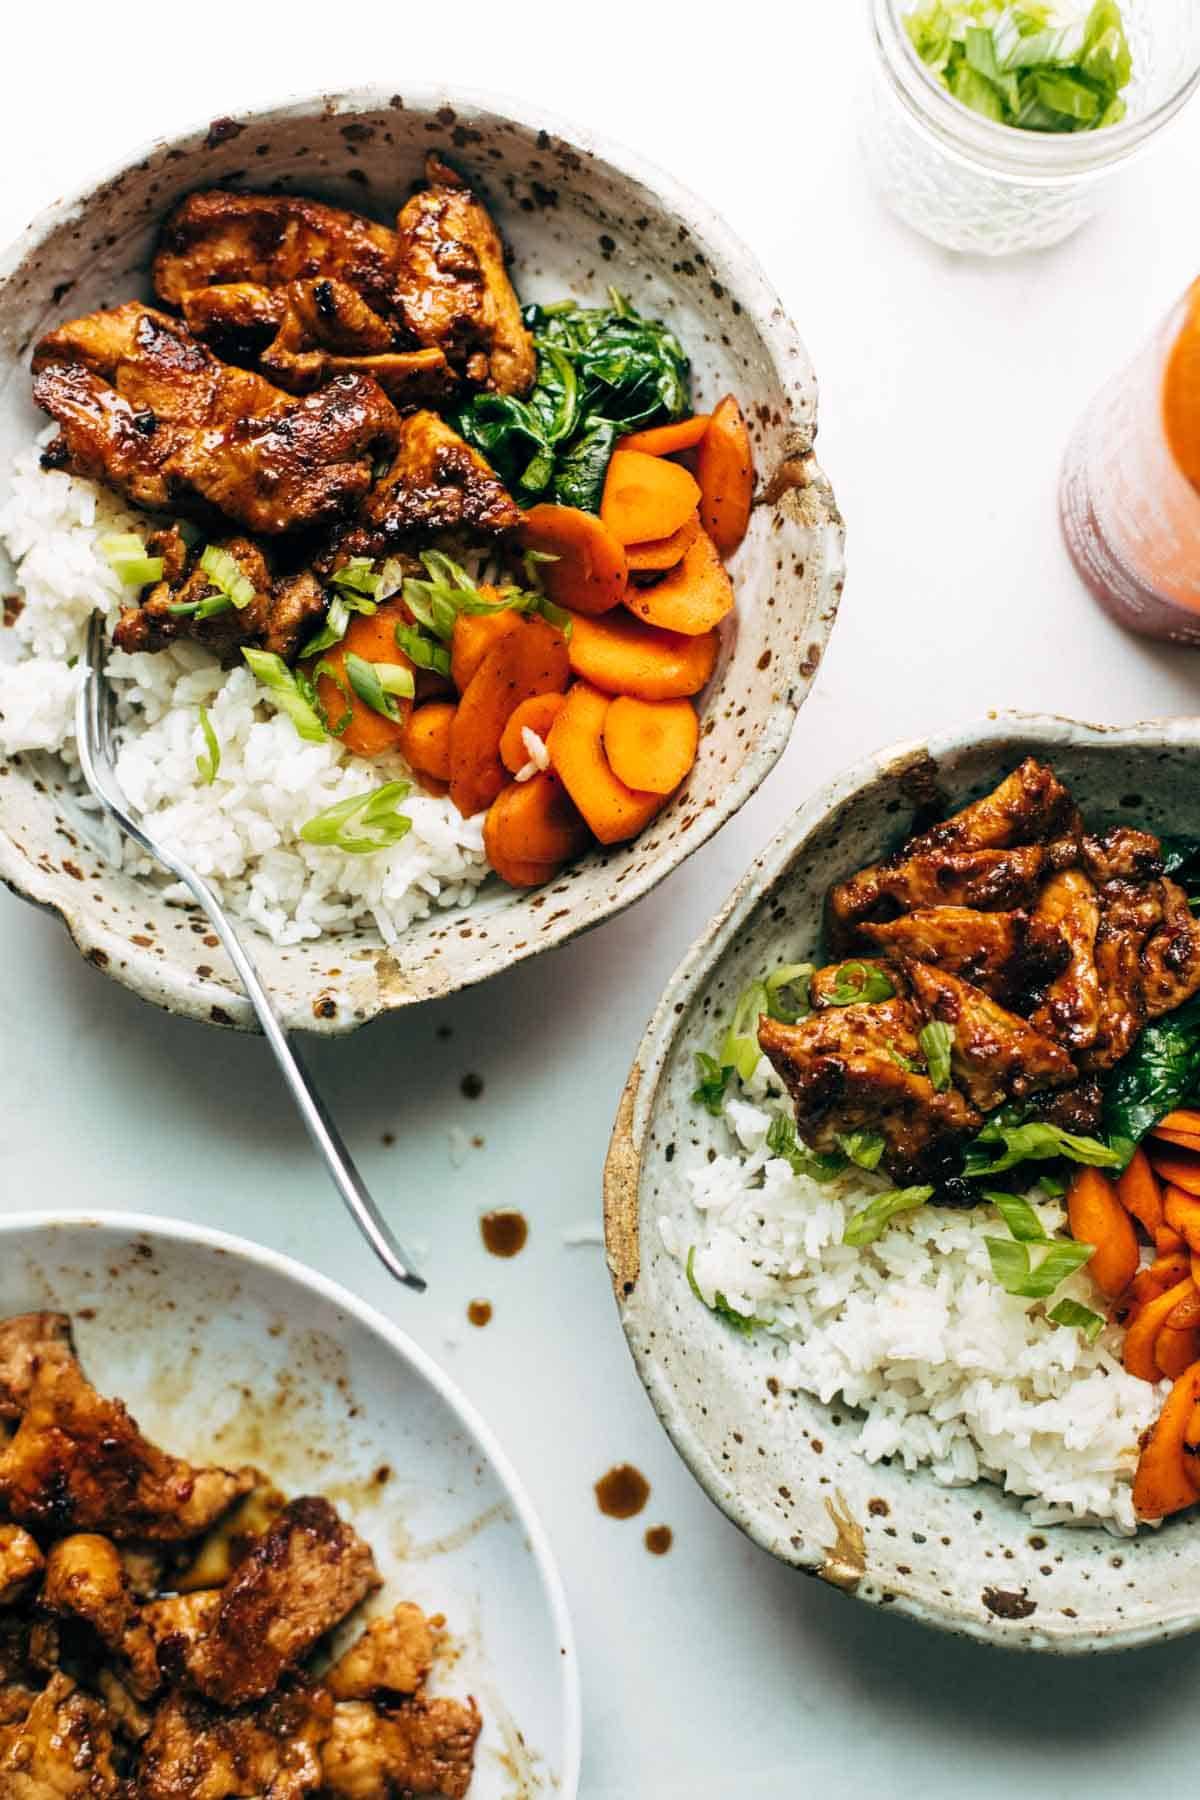 Spicy pork in bowls with veggies and rice.